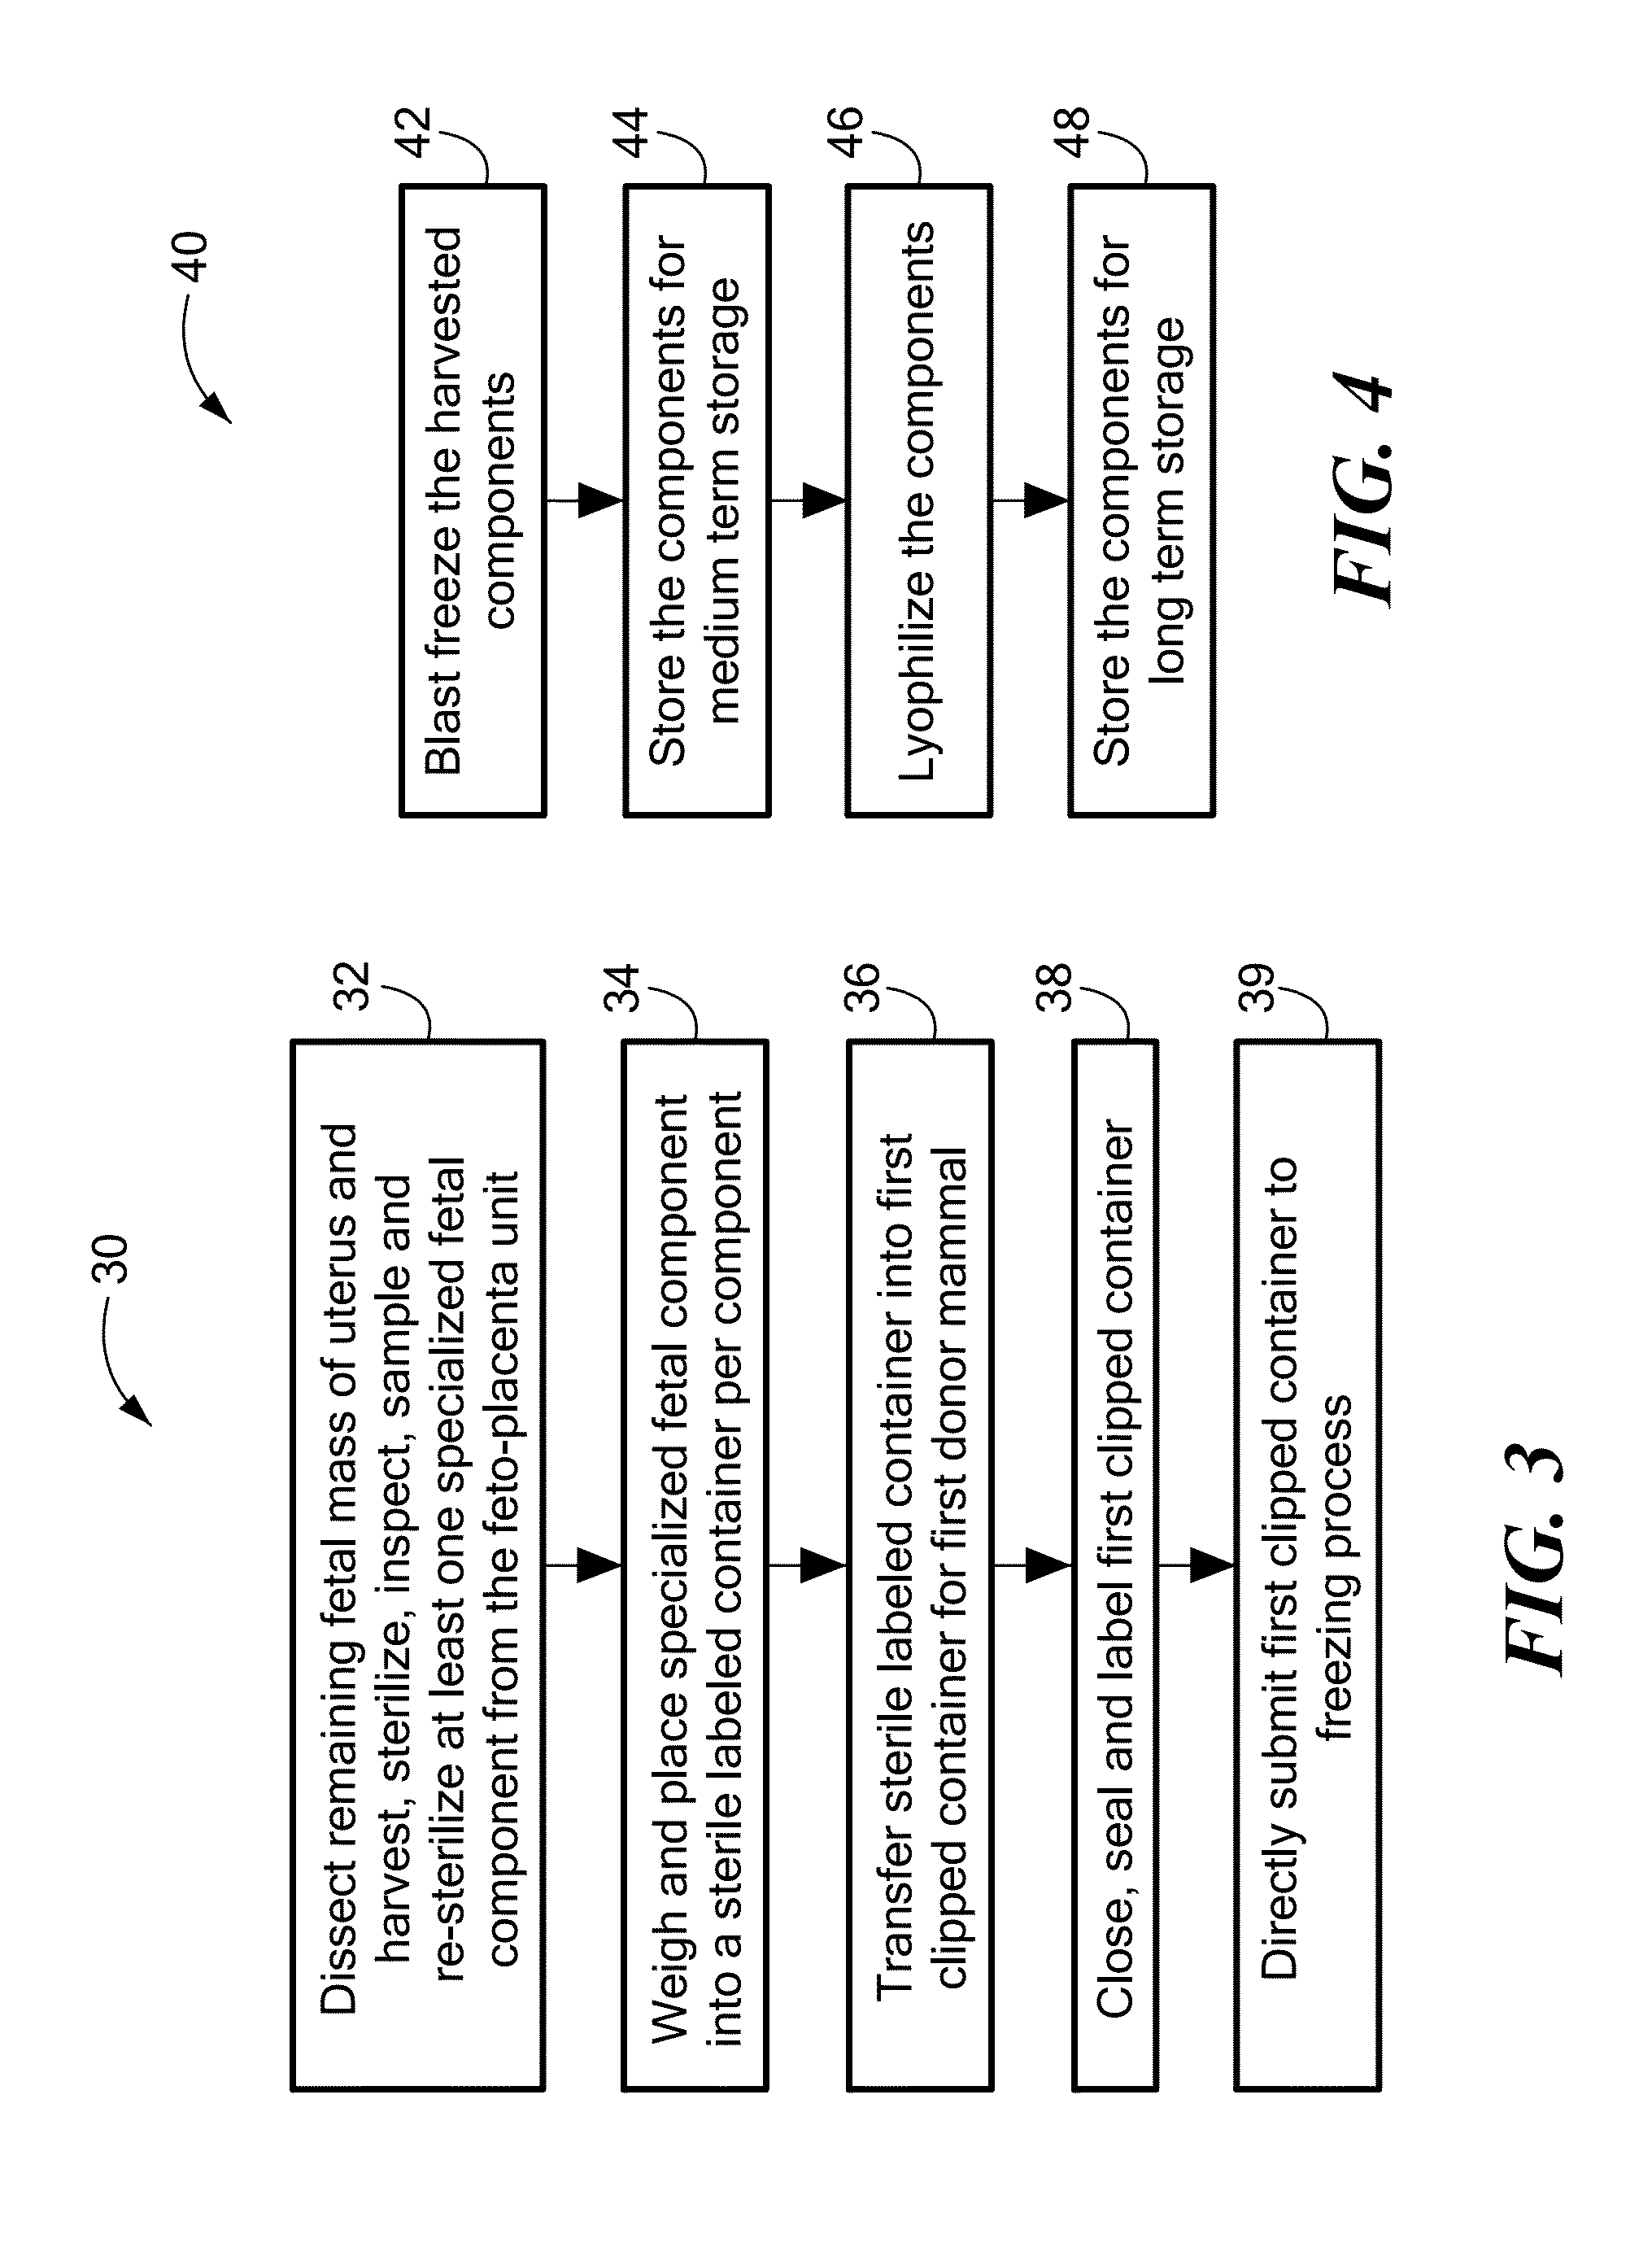 Method for the harvesting, processing, and storage of proteins from the mammalian feto-placental unit and use of such proteins in compositions and medical treatment